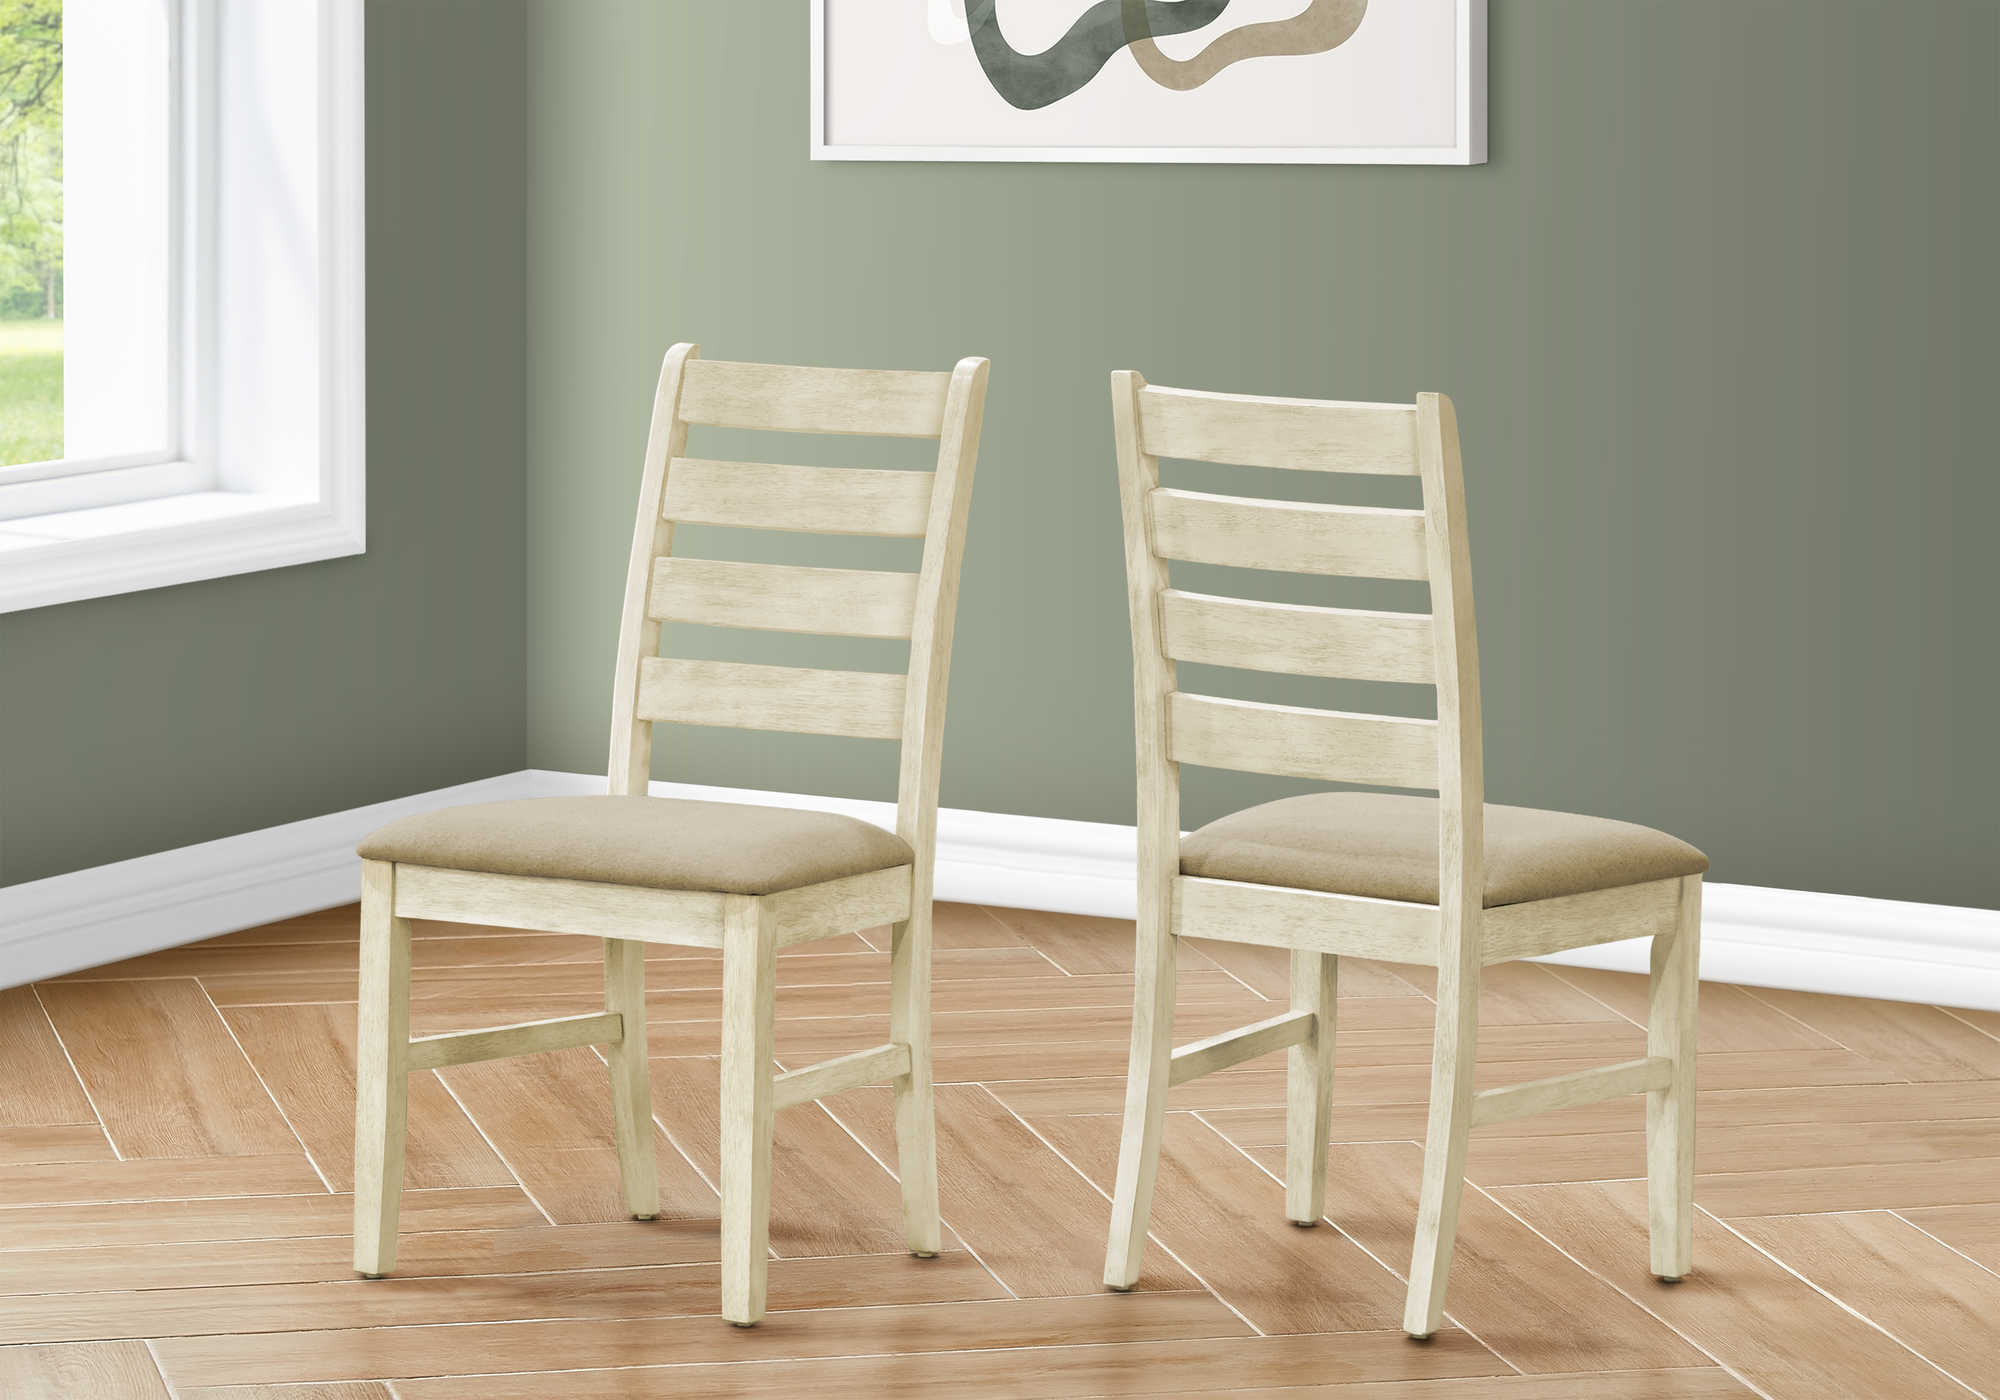 DINING CHAIR - 2PCS / 38"H UPHOLSTERED BEIGE FABRIC